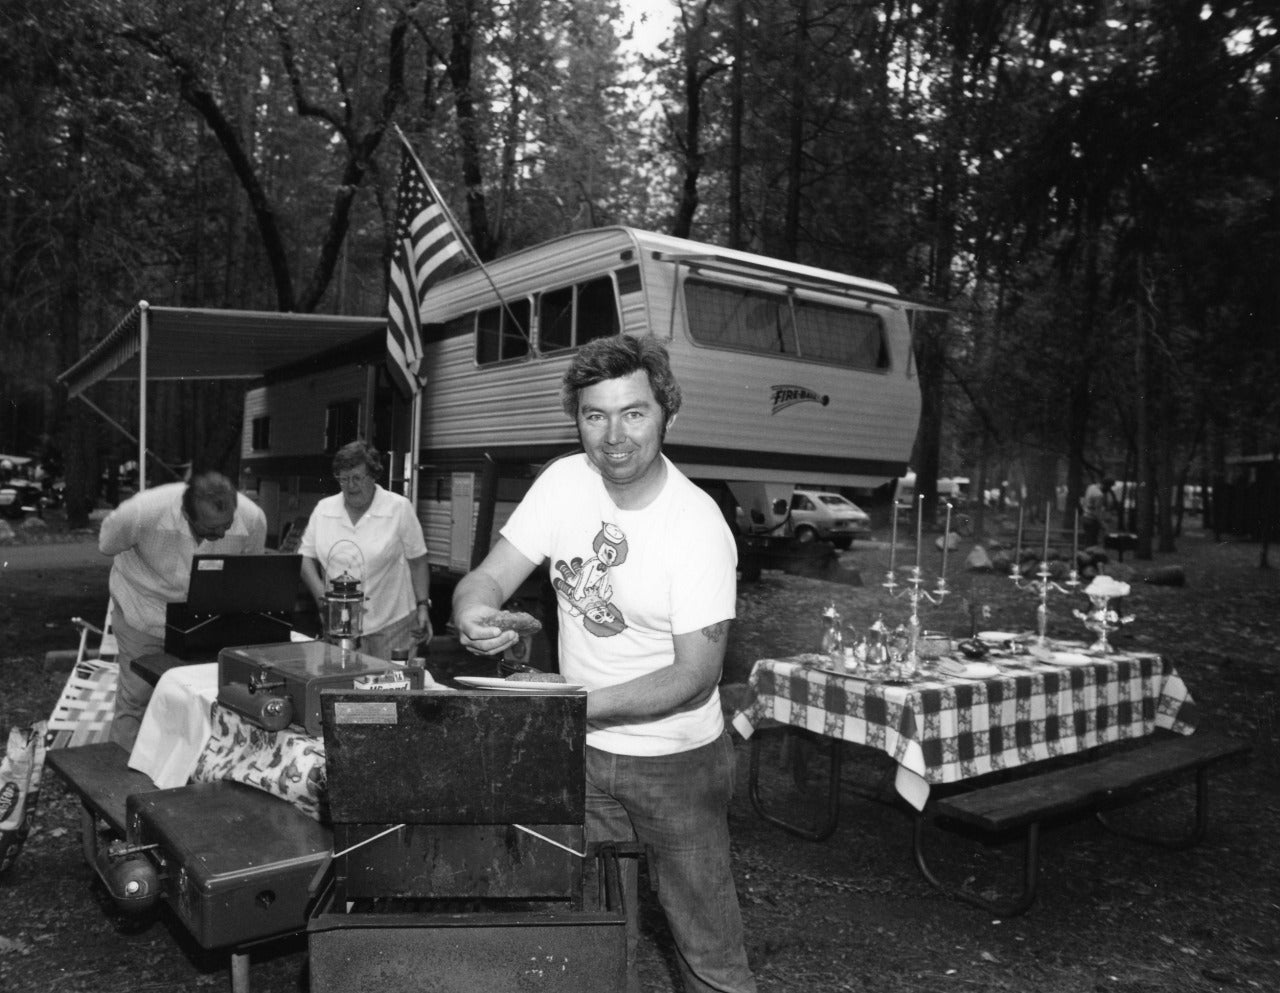 Bill Owens Portrait Photograph - Every summer we go all out on our camp in Yosemite, from Leisure